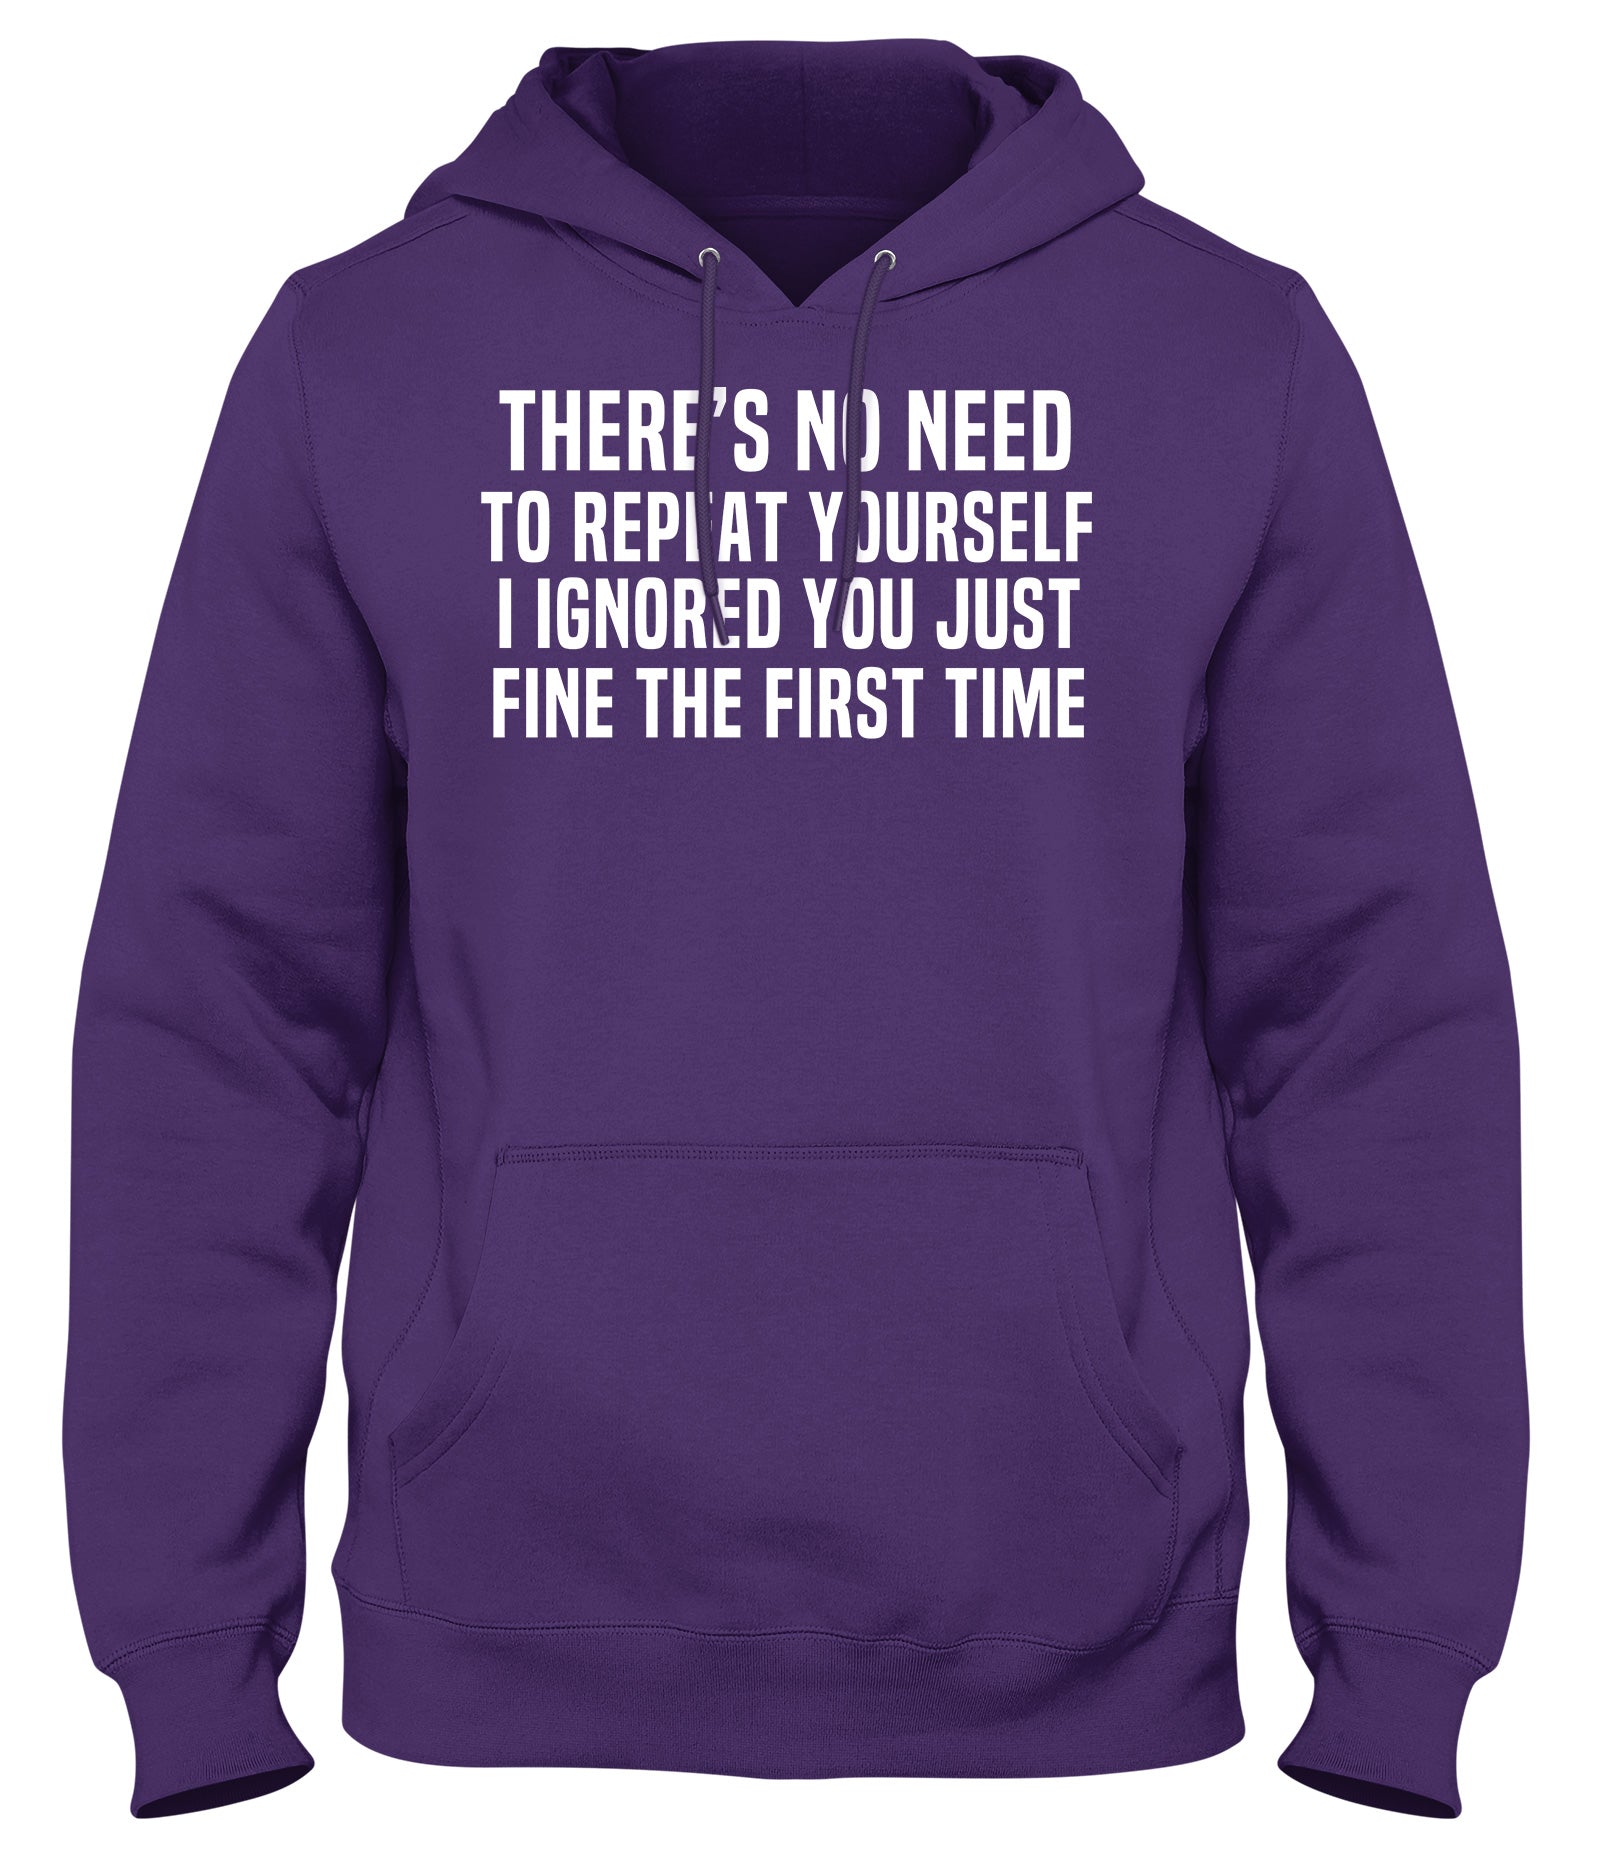 THERE'S NO NEED TO REPEAT YOURSELF. I IGNORED YOU JUST FINE THE FIRST TIME MENS WOMENS UNISEX FUNNY HOODIE